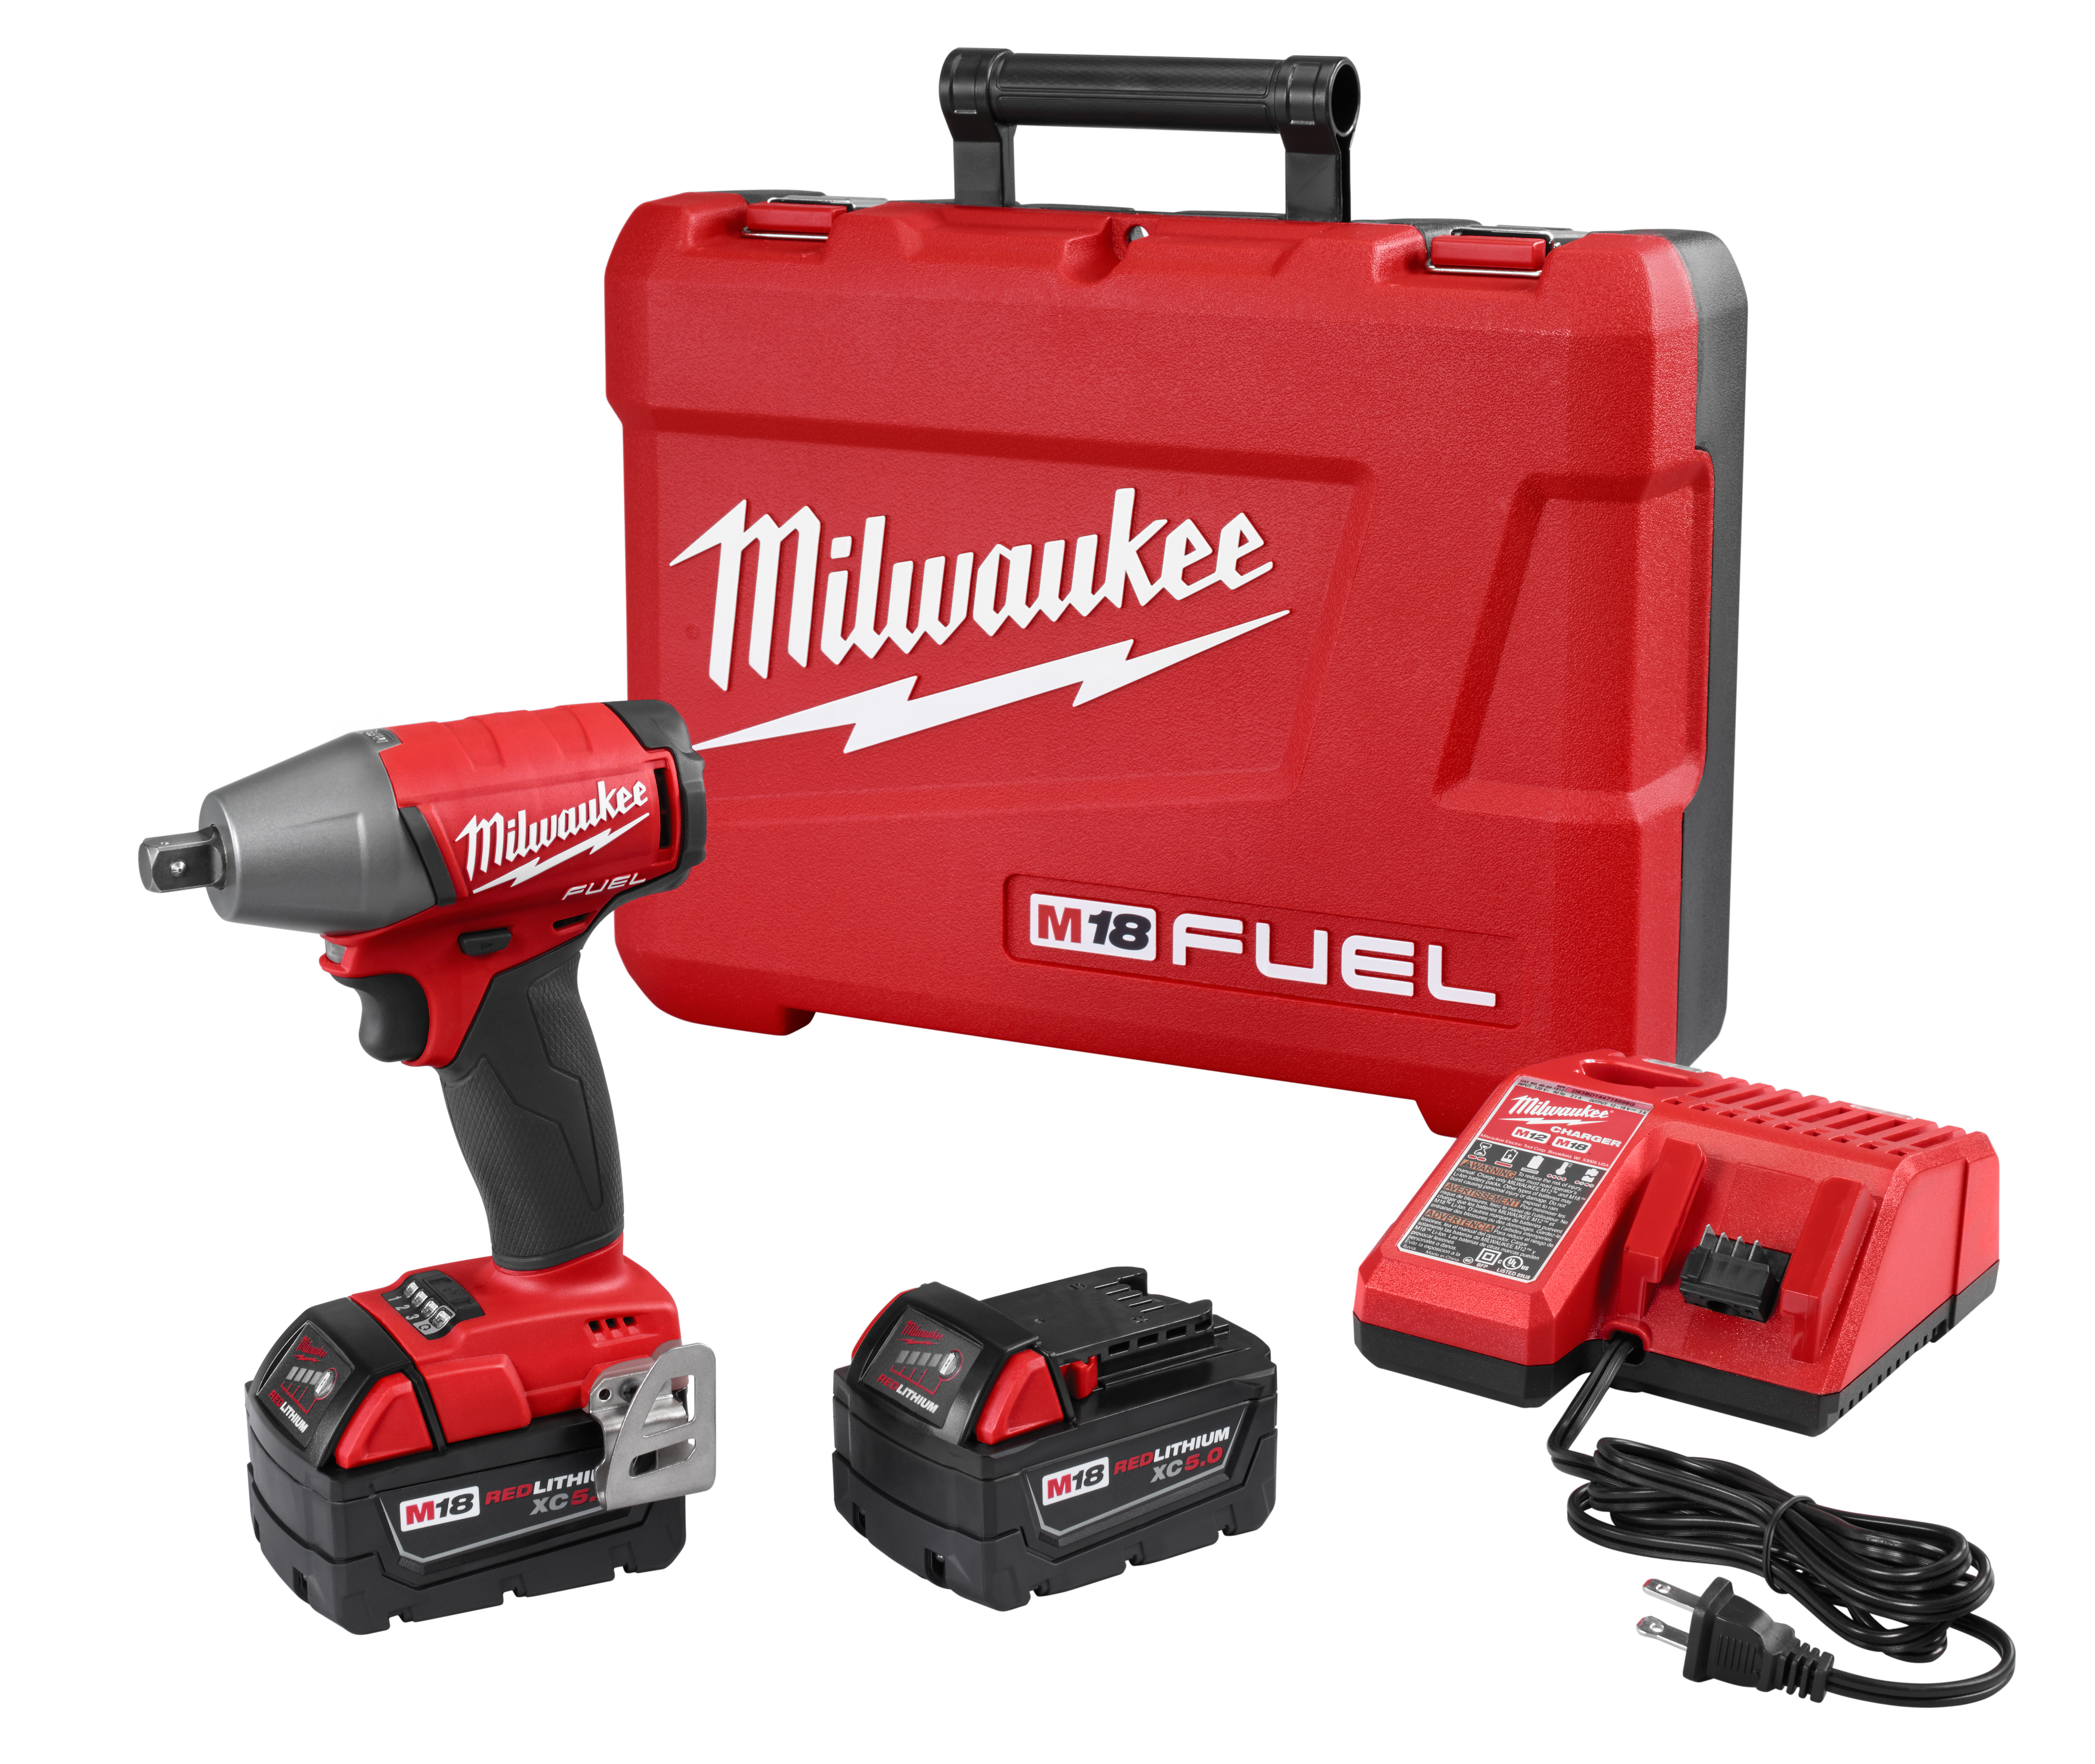 The M18 FUEL™ 1/2” Compact Impact Wrench w/ Pin Detent is the Most Powerful tool in its class by delivering up to 220 ft-lbs of torque in a compact design. The POWERSTATE™ Brushless Motor not only provides unmatched power, but also provides greater efficiency, delivering up to 25PERC more run-time than the leading competitors. REDLINK PLUS™ Intelligence is the most advanced electronic system on the market, preventing damage to the tool and battery caused by overloading or overheating. REDLITHIUM™ Batteries (not included) deliver more work per charge and more work over the life of the pack than competitive batteries on the market. The 4-Mode DRIVE CONTROL™ provides greater control over output speed and power for greater versatility by delivering 0-900 RPM in Mode 1, 0-1600 RPM in Mode 2, and 0-2500 RPM in Mode 3. Auto Shut-Off Mode intelligently detects when the tool has impacted on a fastener for one second and automatically shuts the tool down, reducing the likelihood of overdriving and damaging materials. Bullets: POWERSTATE™ Brushless Motor delivers 220 ft-lbs. of fastening torque REDLINK PLUS™ Intelligence prevents damage to the tool and battery due to overloading or overheating REDLITHIUM™ Batteries deliver more work per charge and more work over the life of the battery 4-Mode DRIVE CONTROL™ provides greater control over output speed and power Utilizes a Pin Detent design for maximum socket retention. 63902